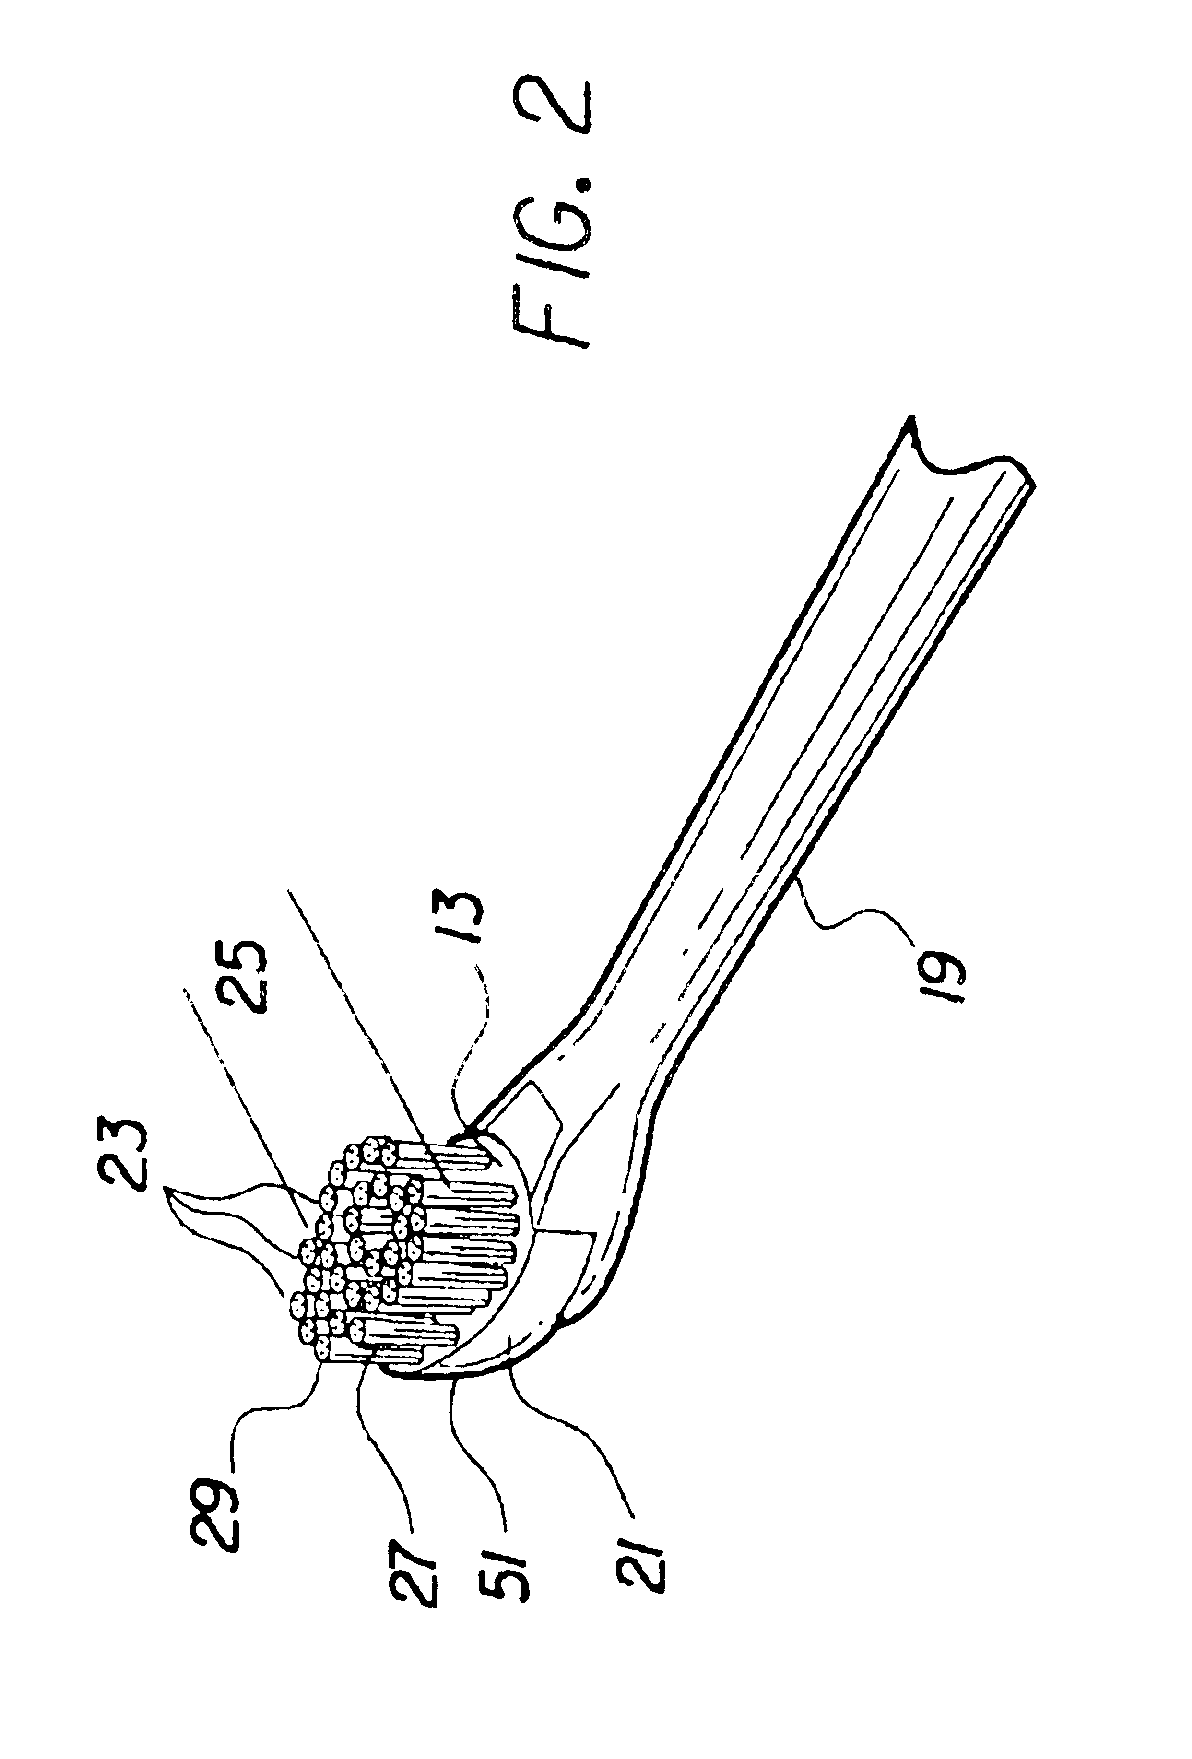 Brush section for an electric toothbrush